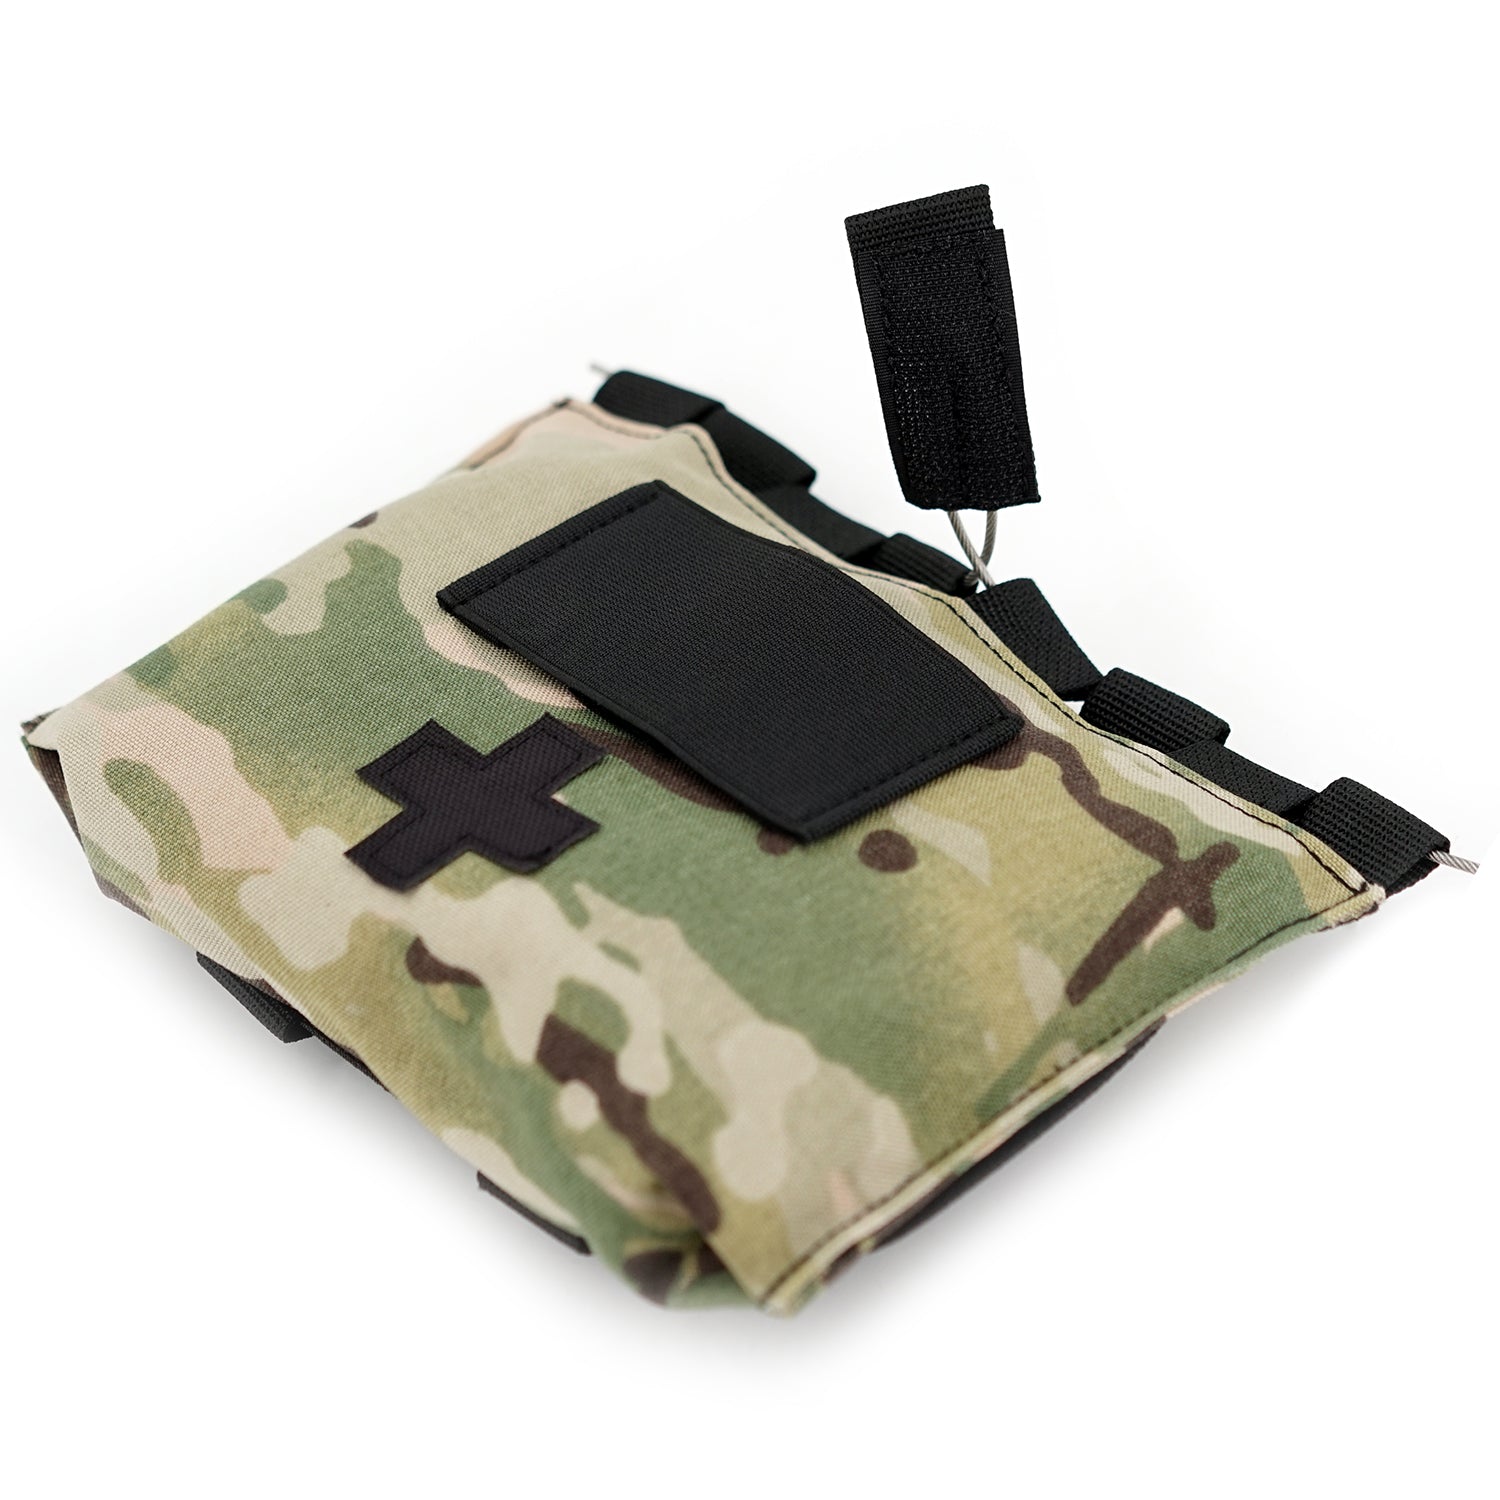 TQS style blow out medic pouch cag used - Shekkin Gears